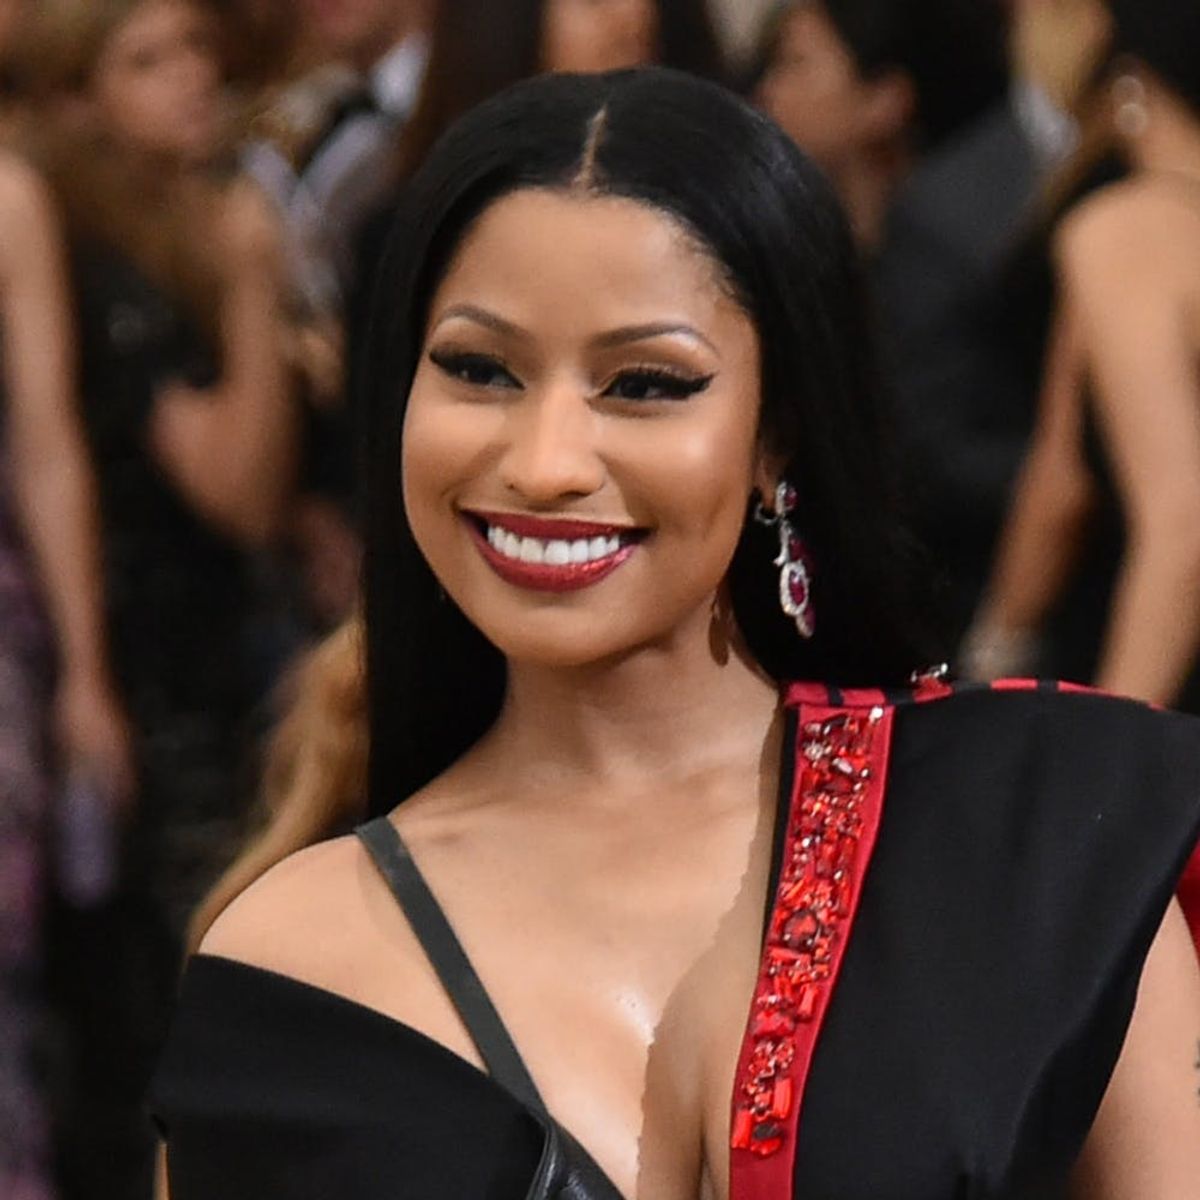 Nicki Minaj Just Pulled the Most Generous Internet Thread of All Time